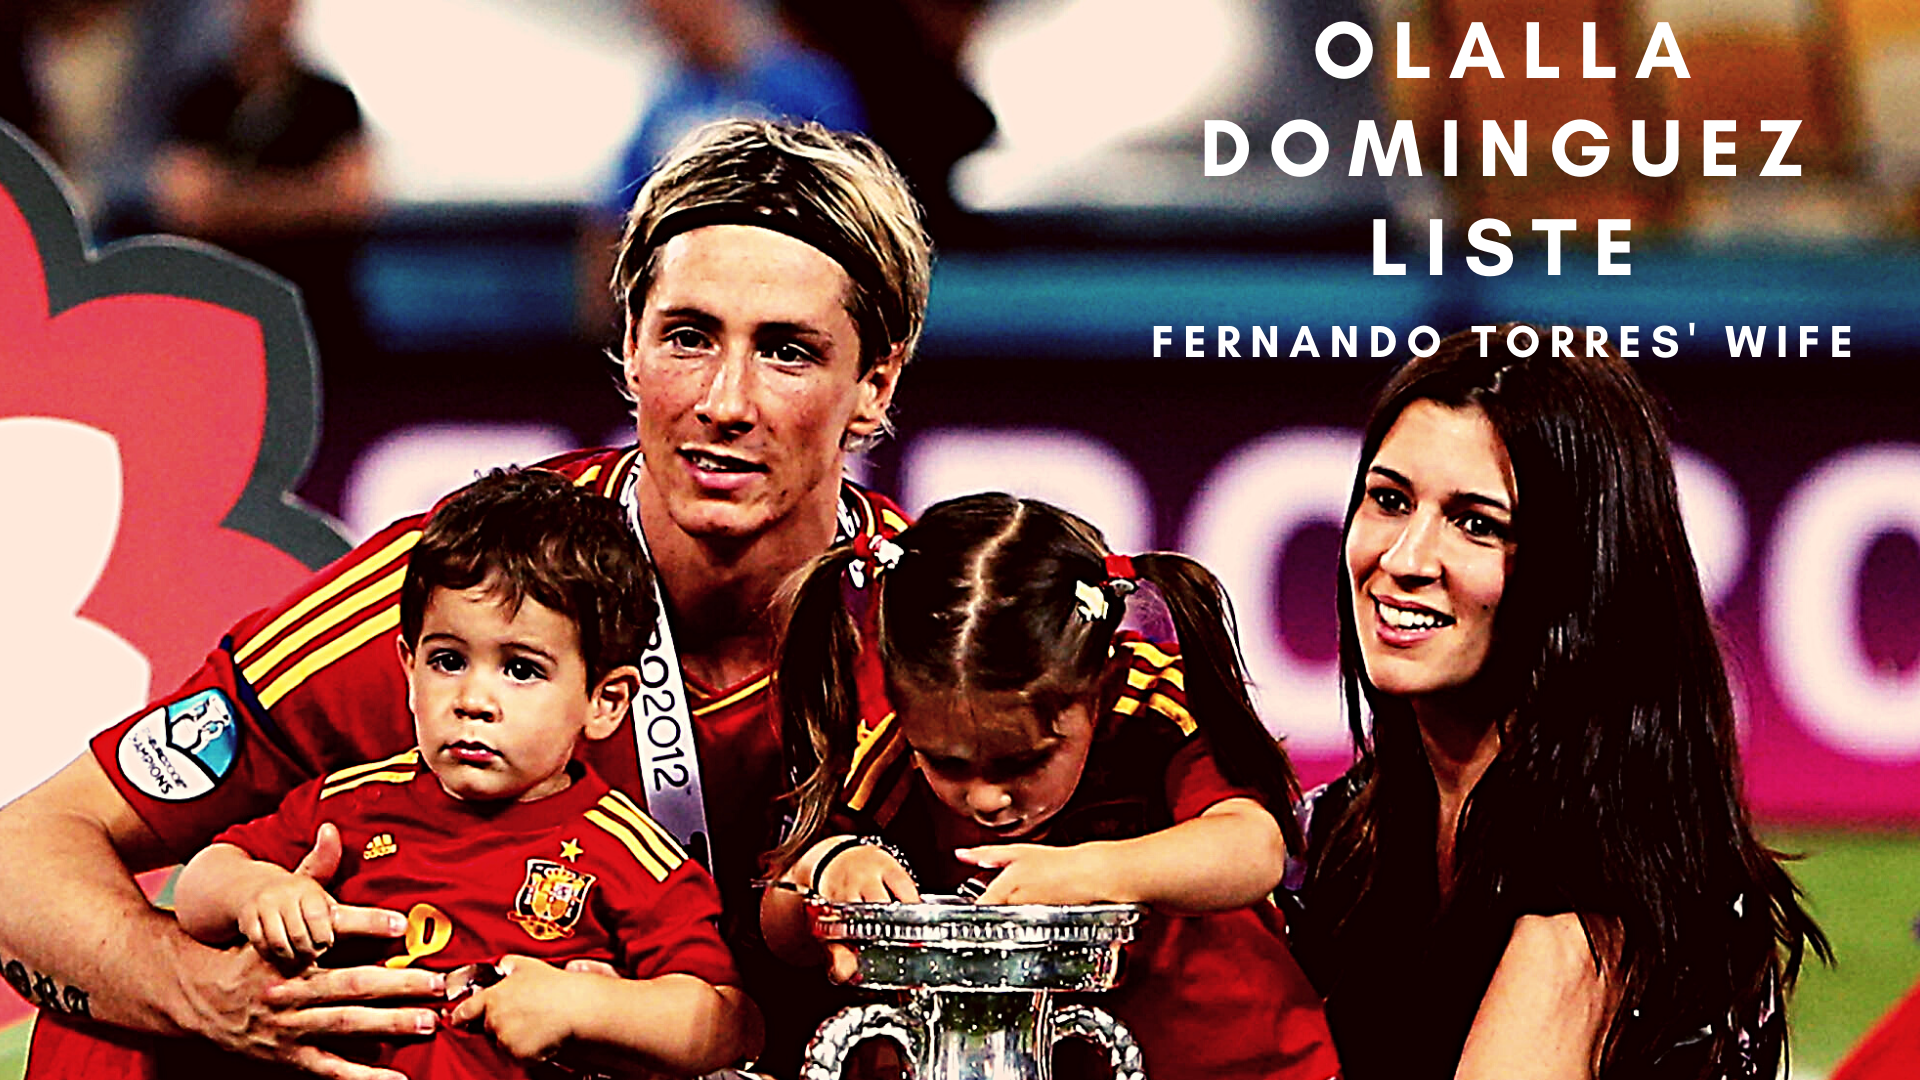 Who Is Olalla Dominguez Liste? Meet The Wife Of Fernando Torres. (Original Photo by Alex Grimm/Getty Images)